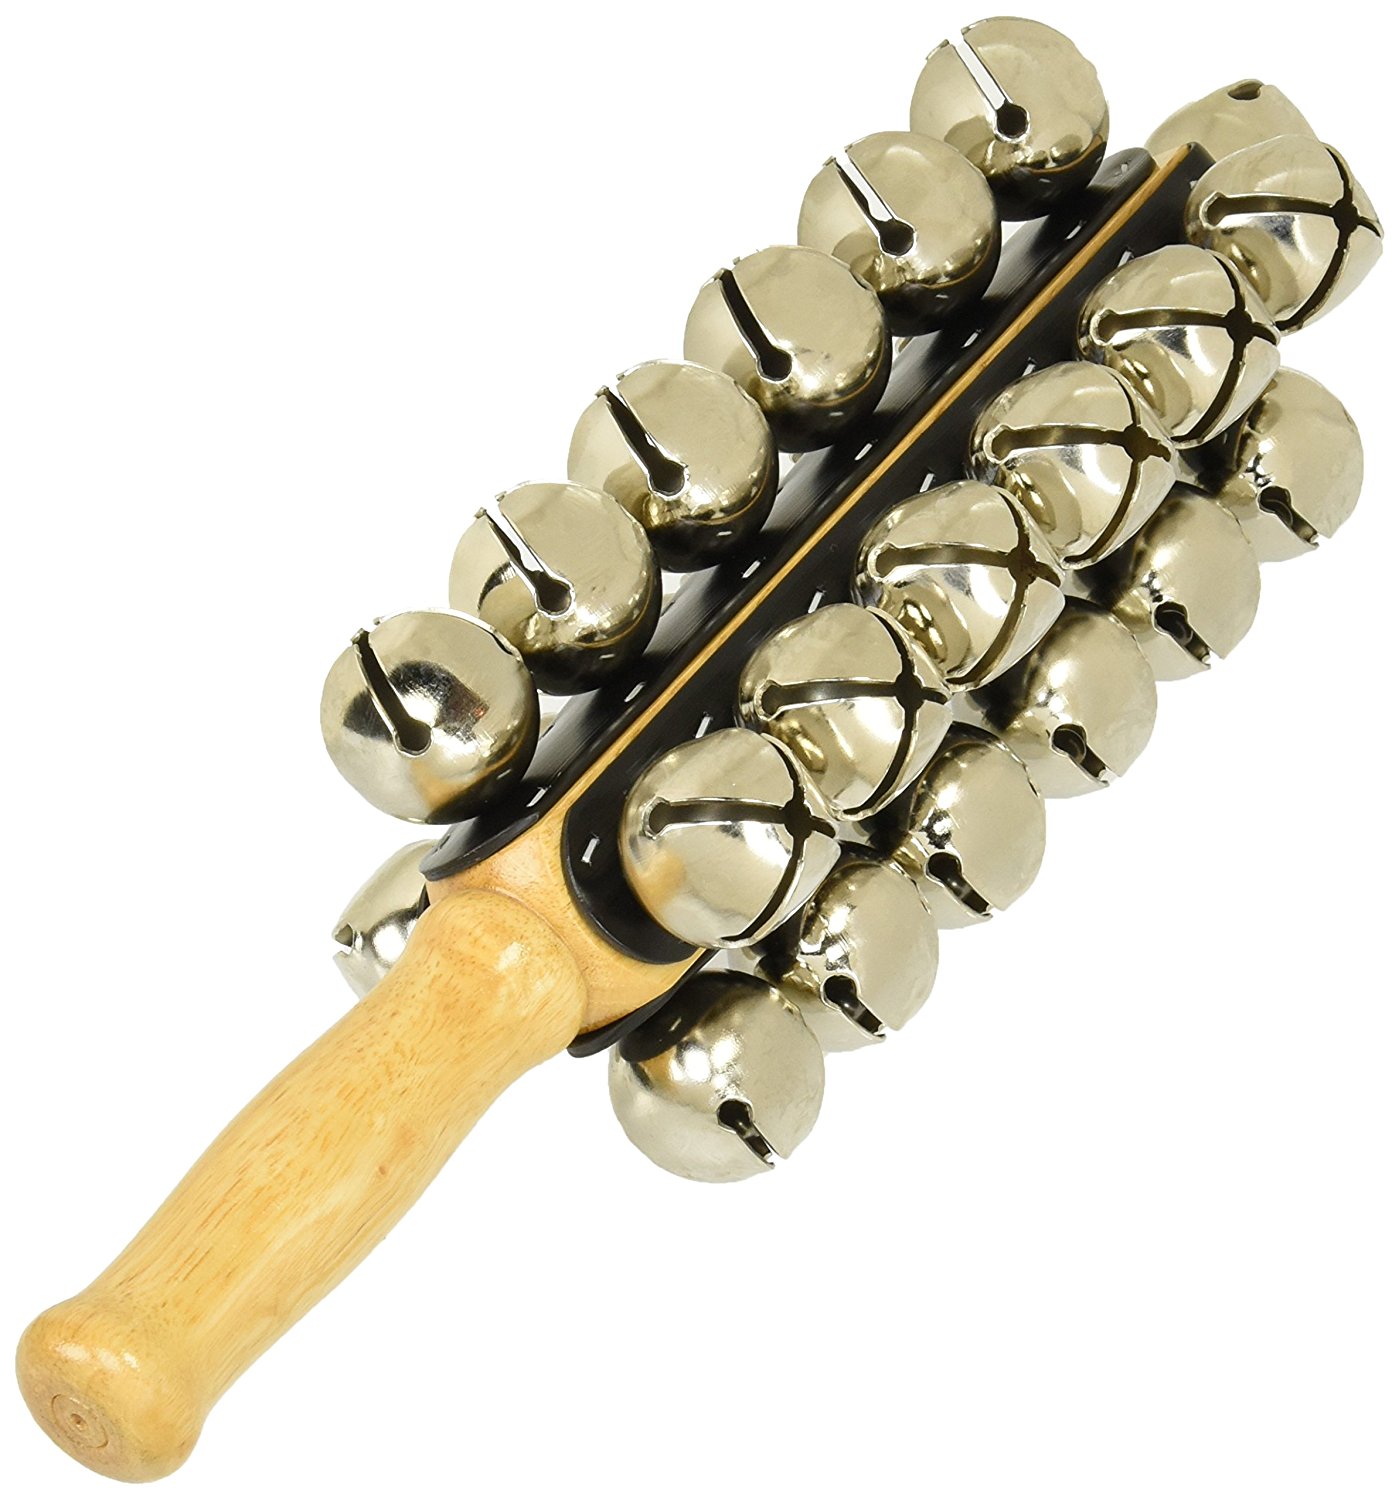 Amazon.com: Latin Percussion CP374 Sleigh Bells: Musical Instruments